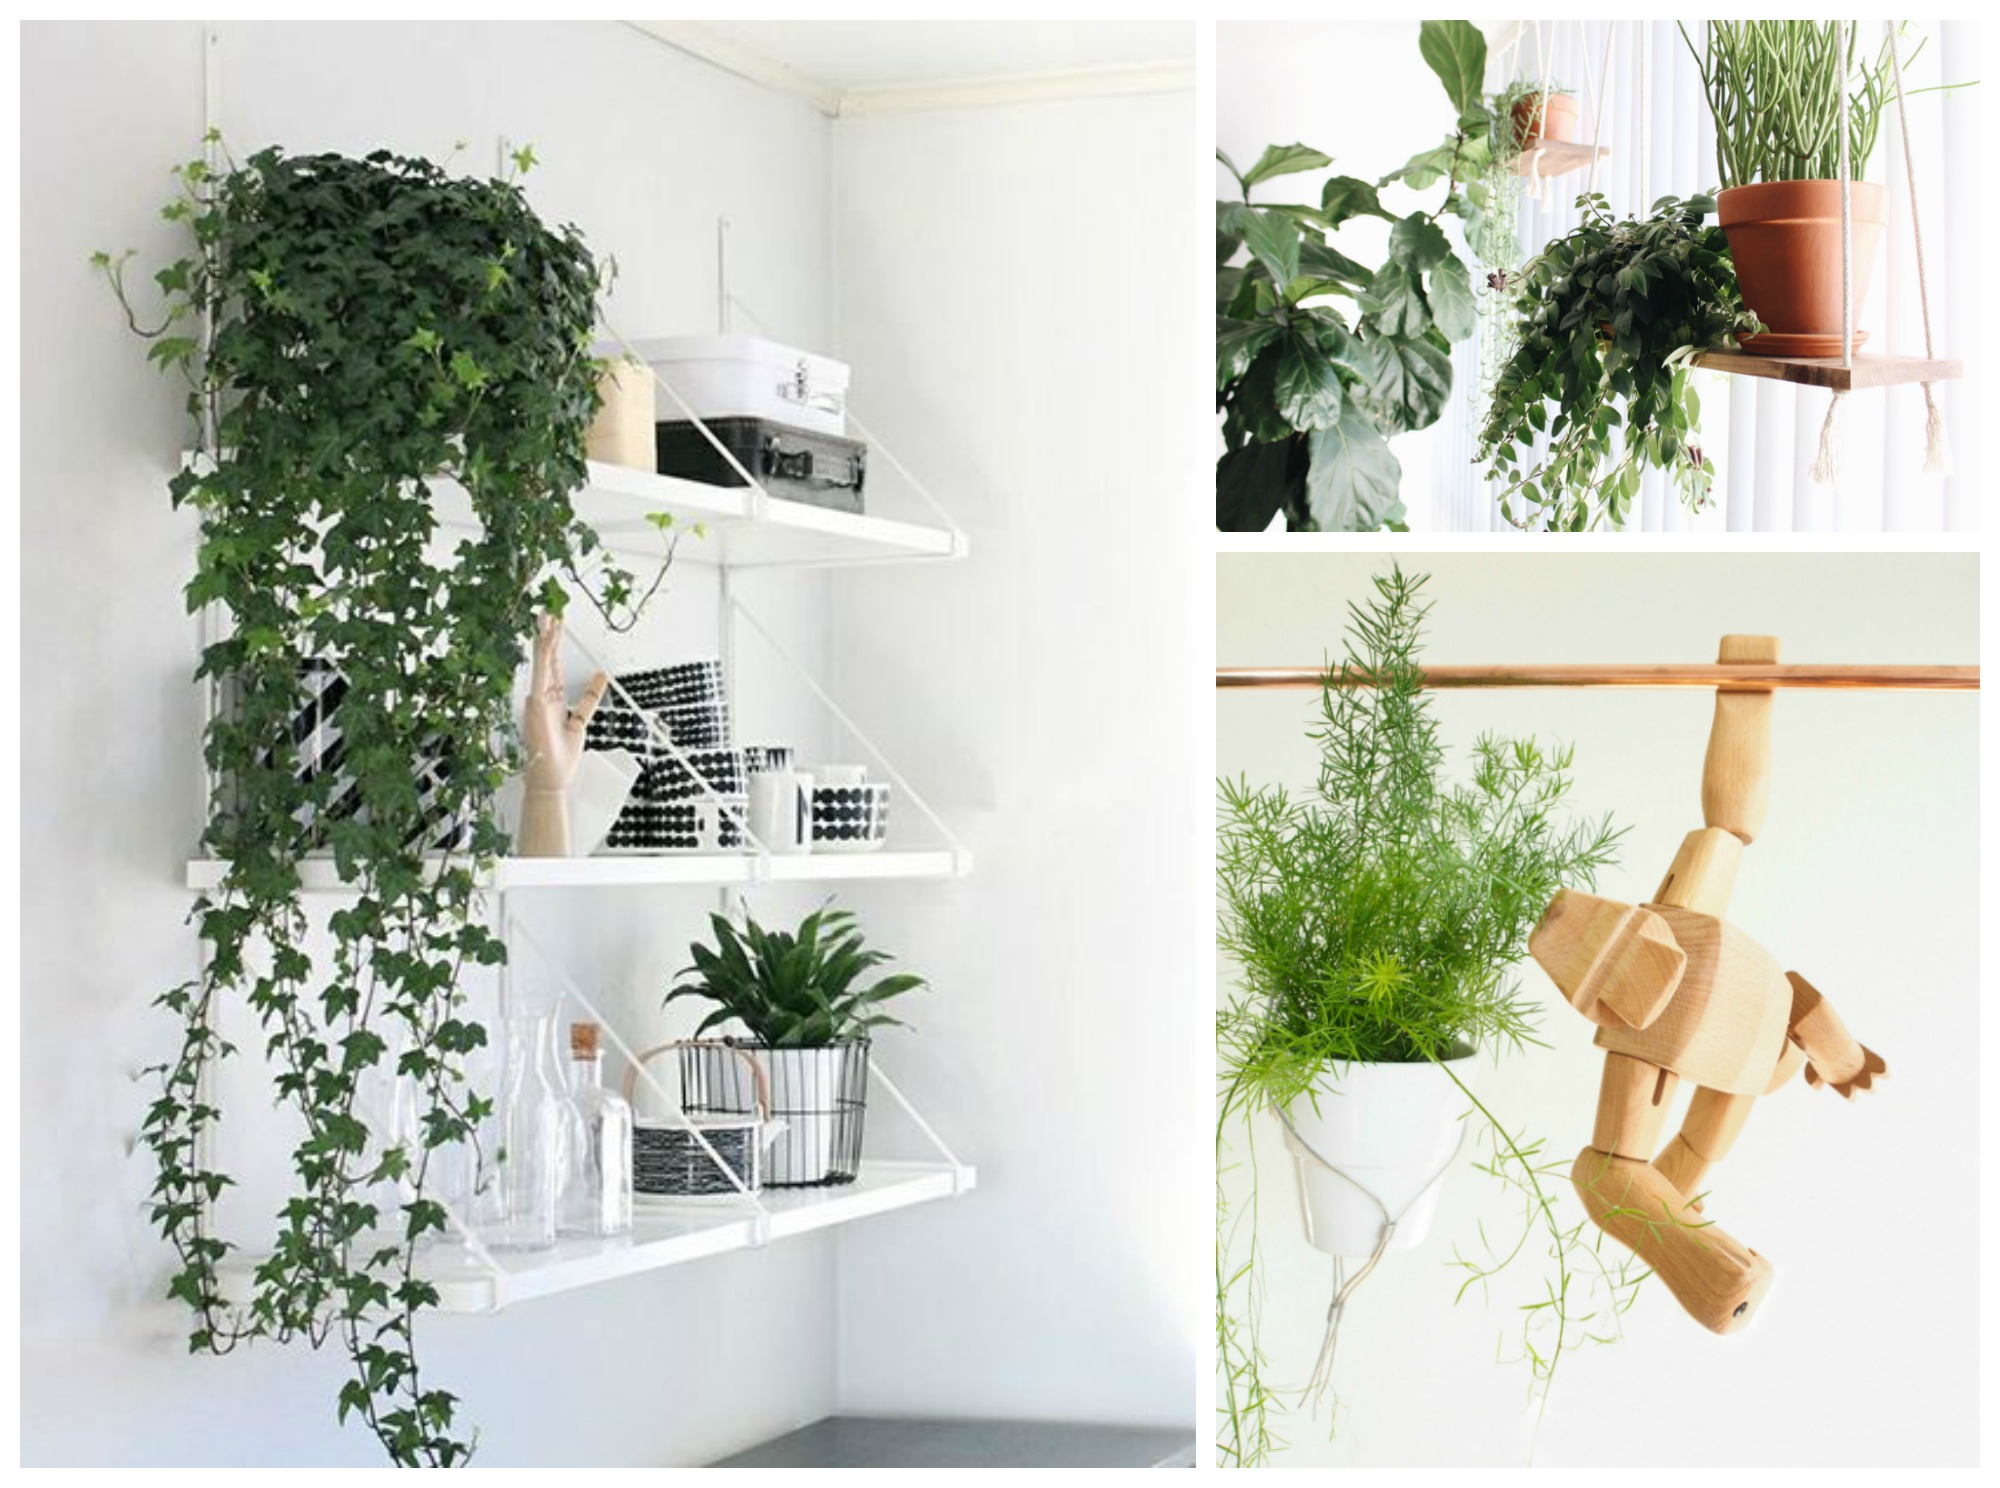 10 Hanging Plants That'll Make Your Home Look Amazing - Chasing Foxes